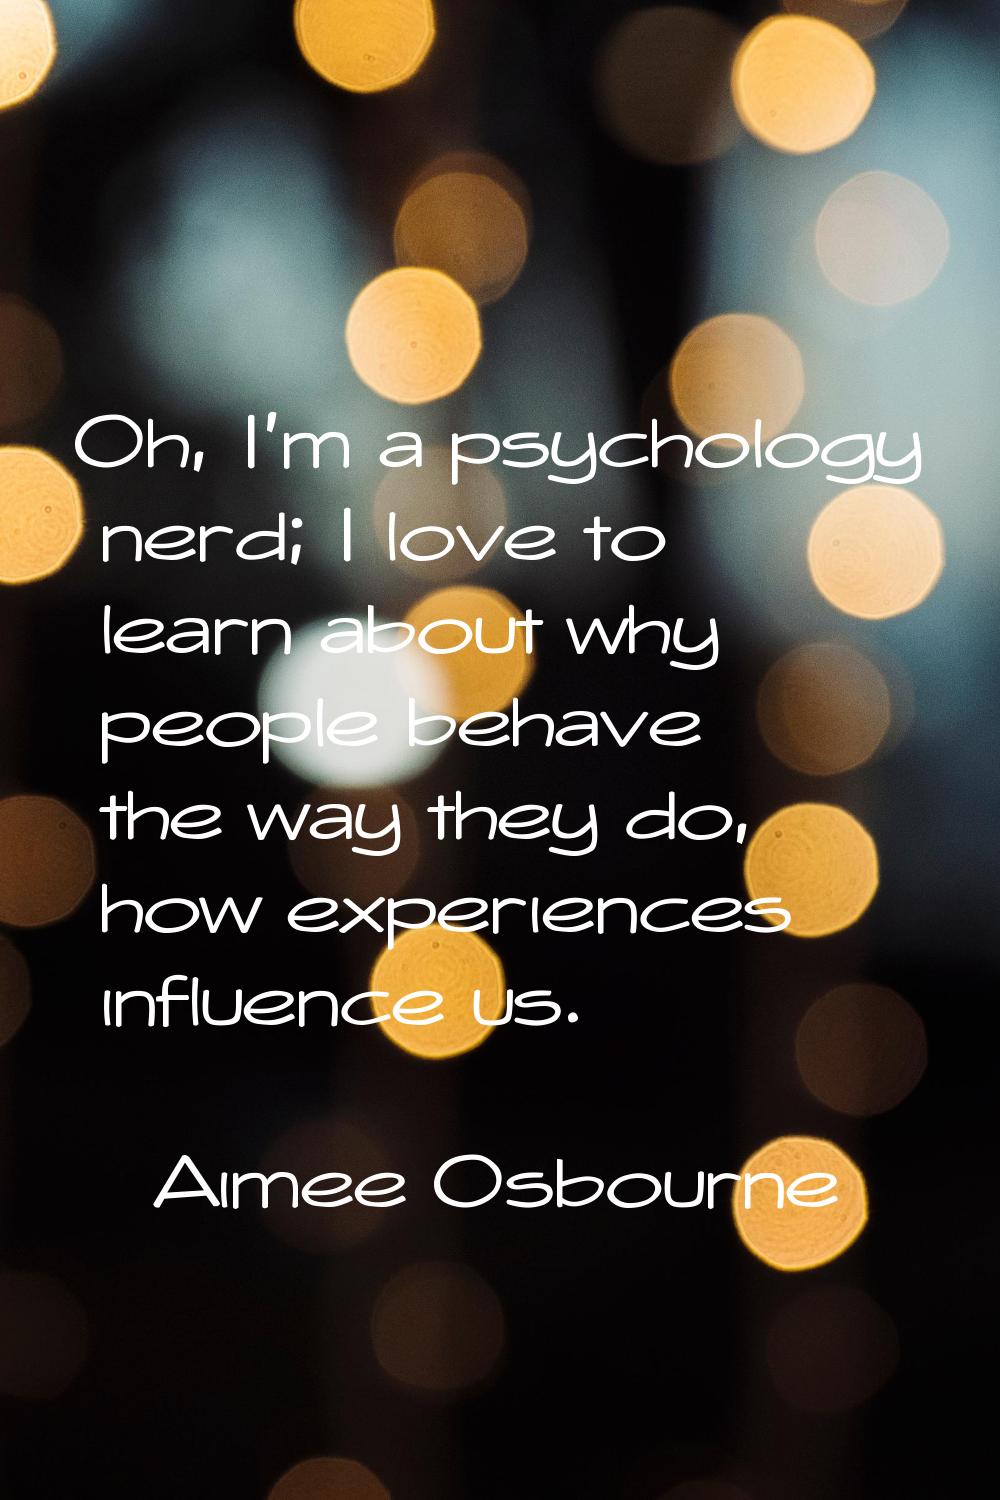 Oh, I'm a psychology nerd; I love to learn about why people behave the way they do, how experiences